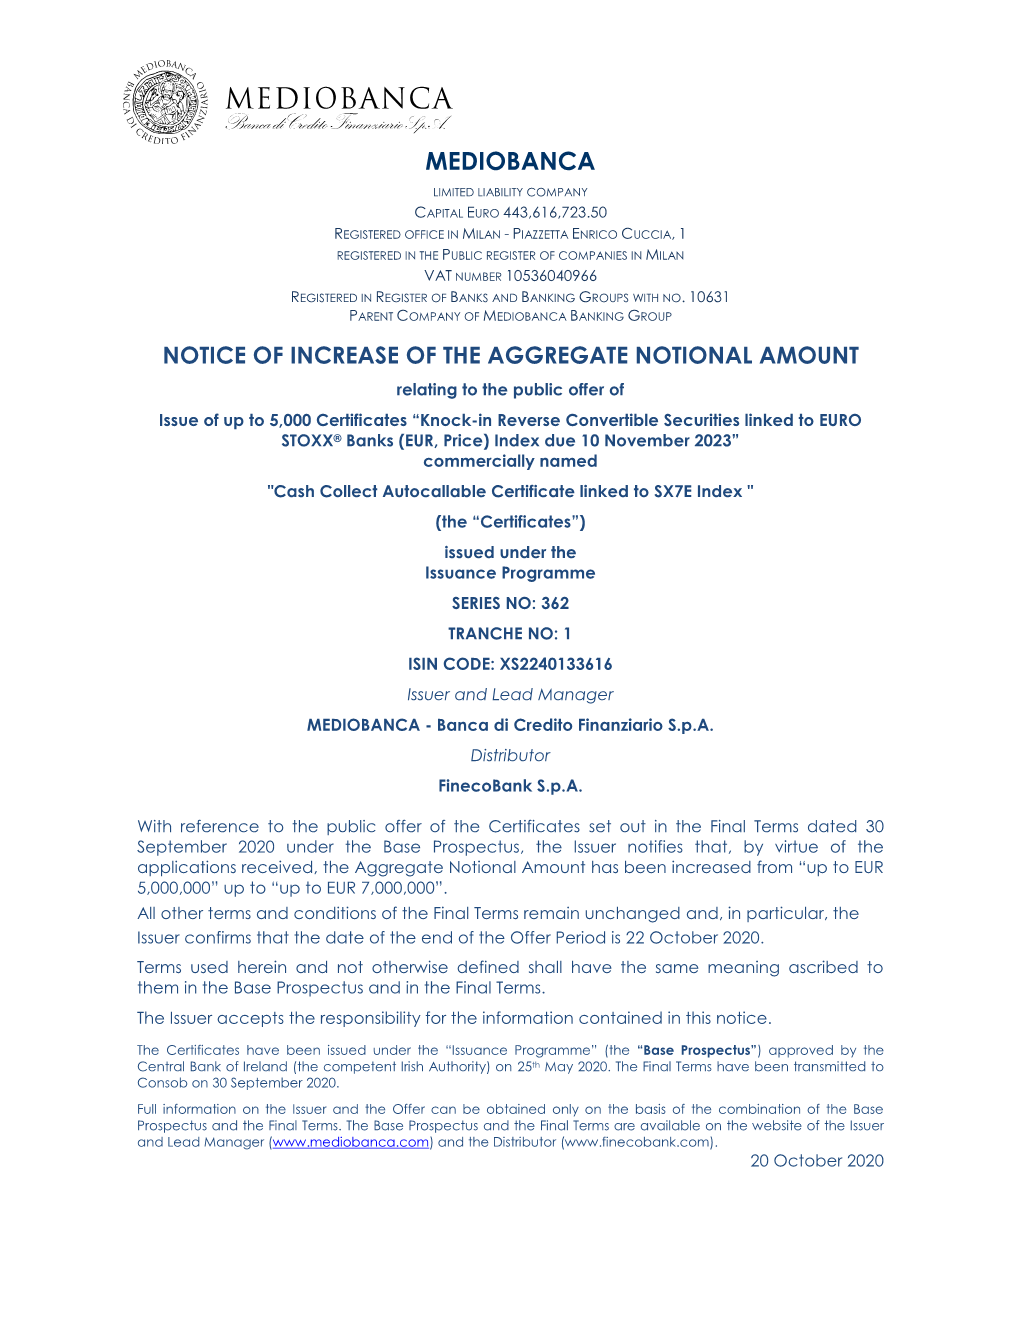 Notice of Increase of the Aggregate Notional Amount